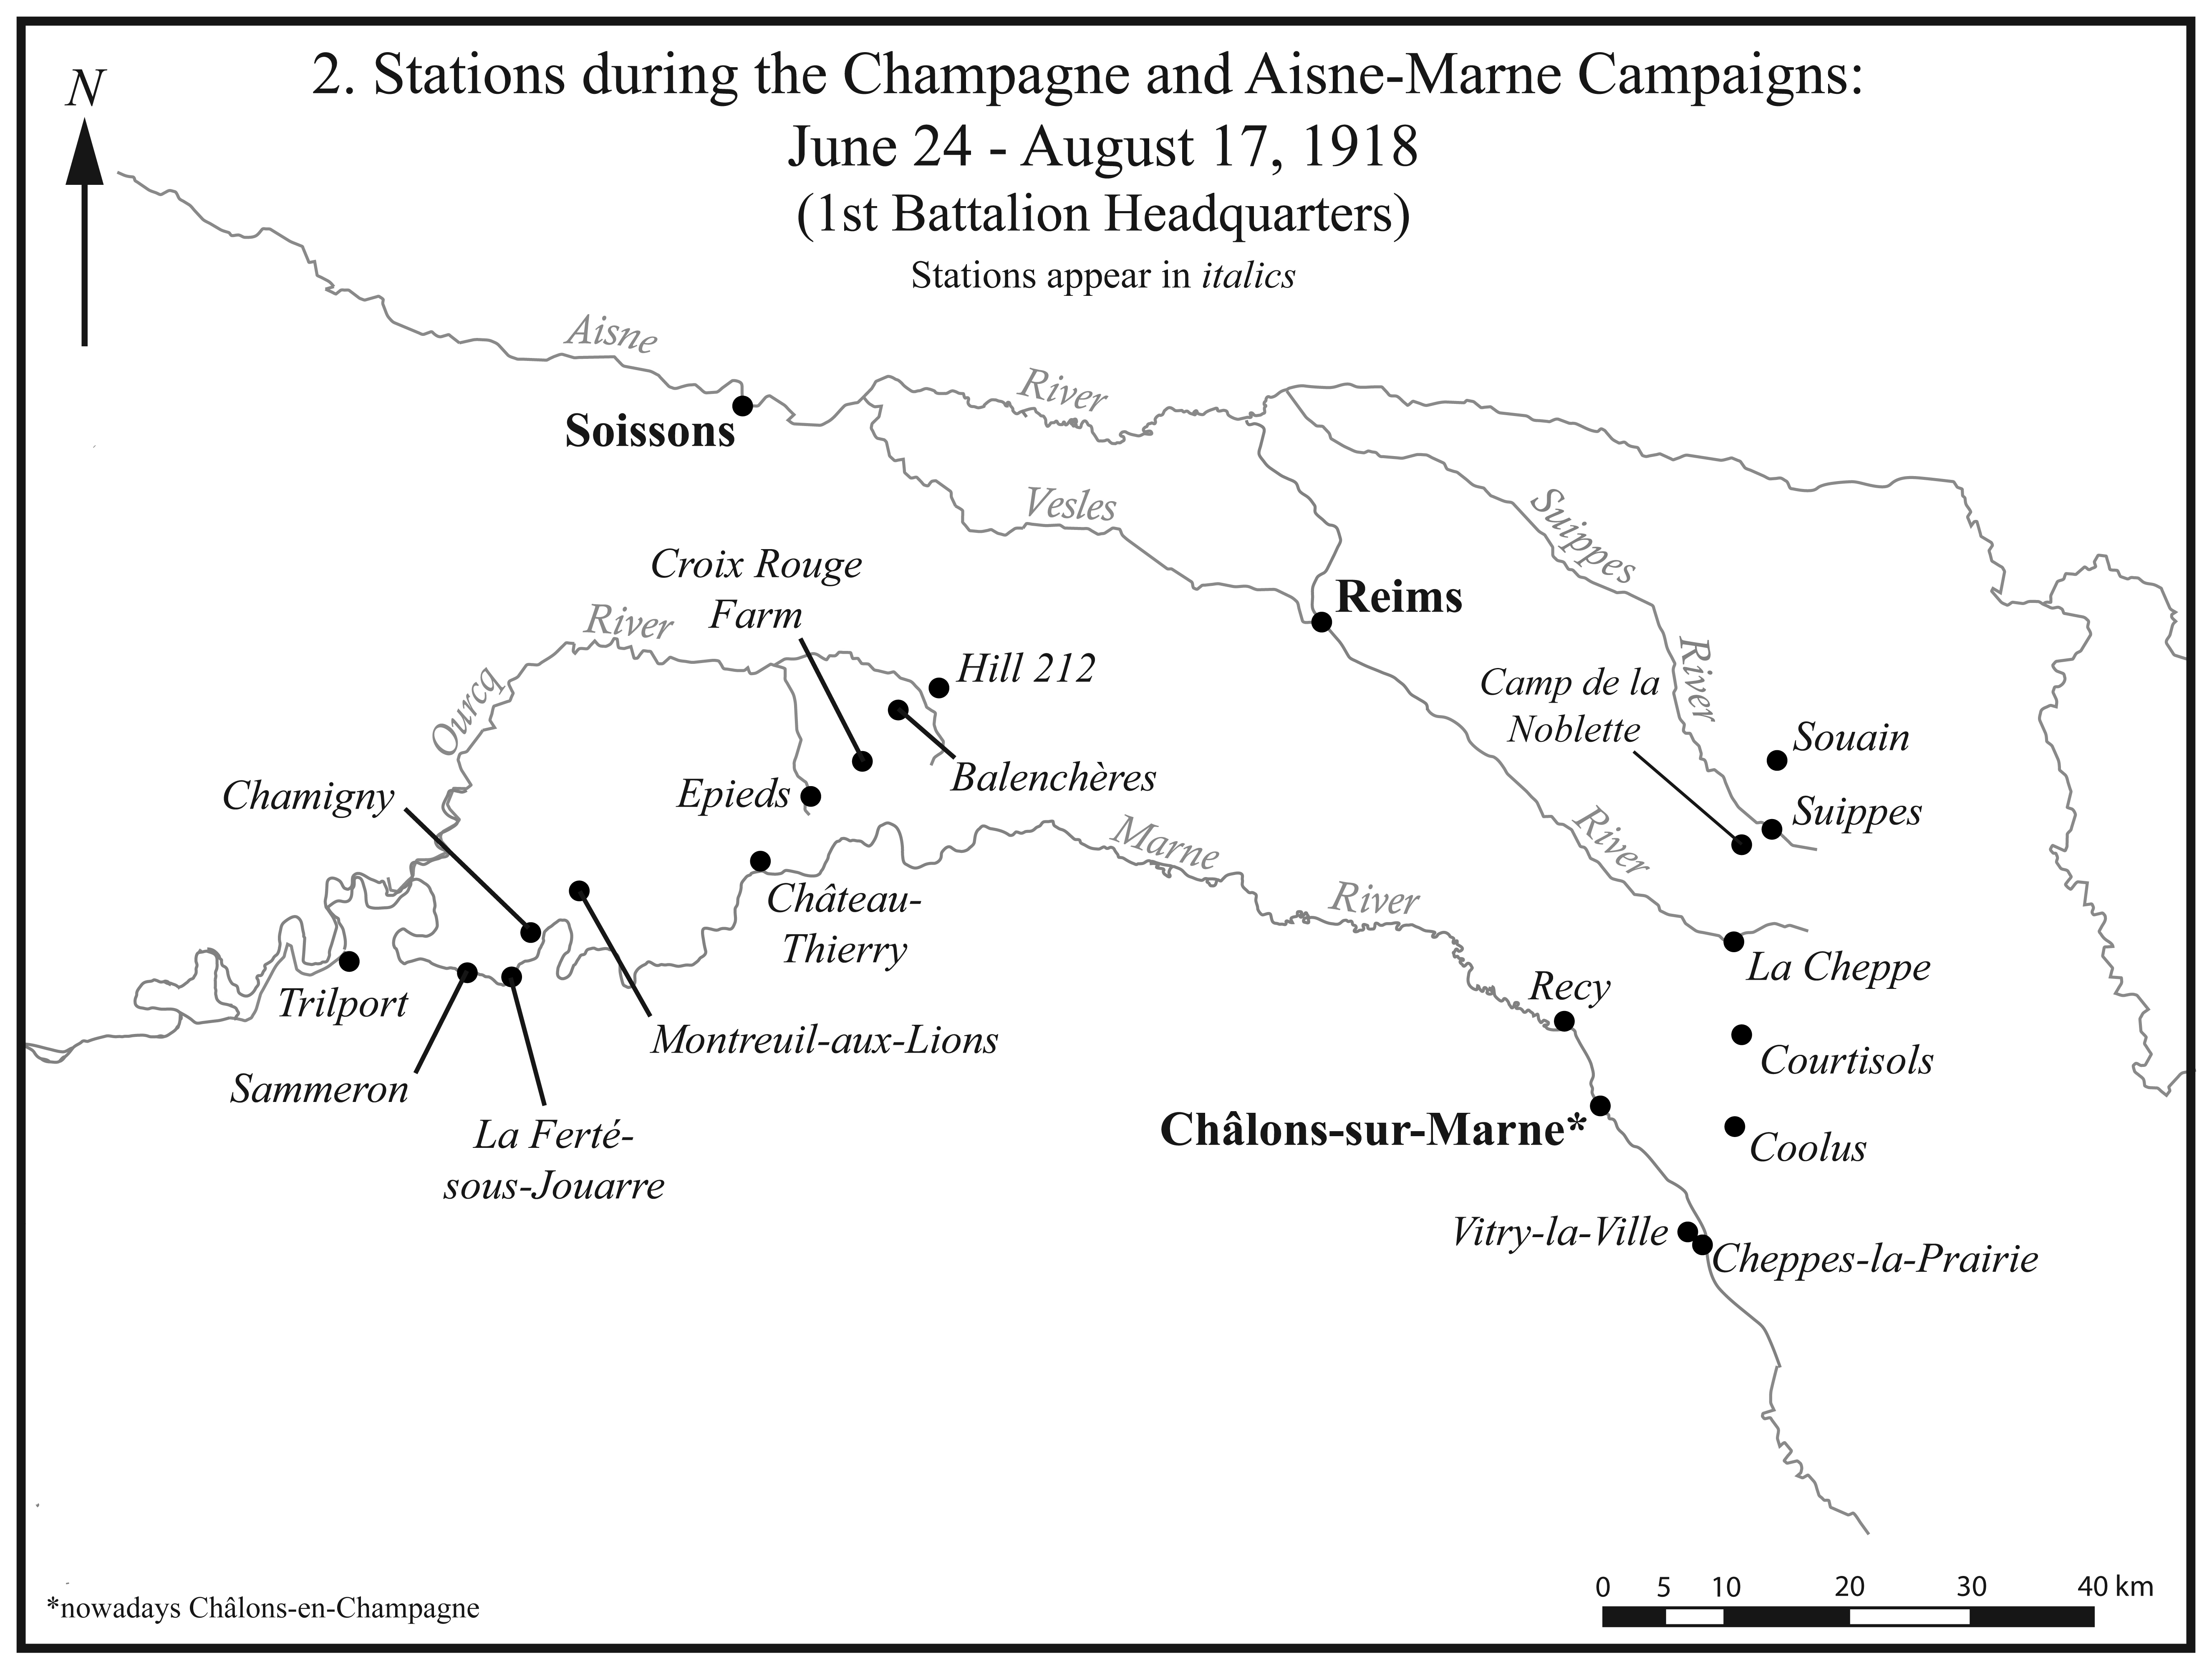 I.2. Stations during the Champagne and Aisne-Marne campaigns.